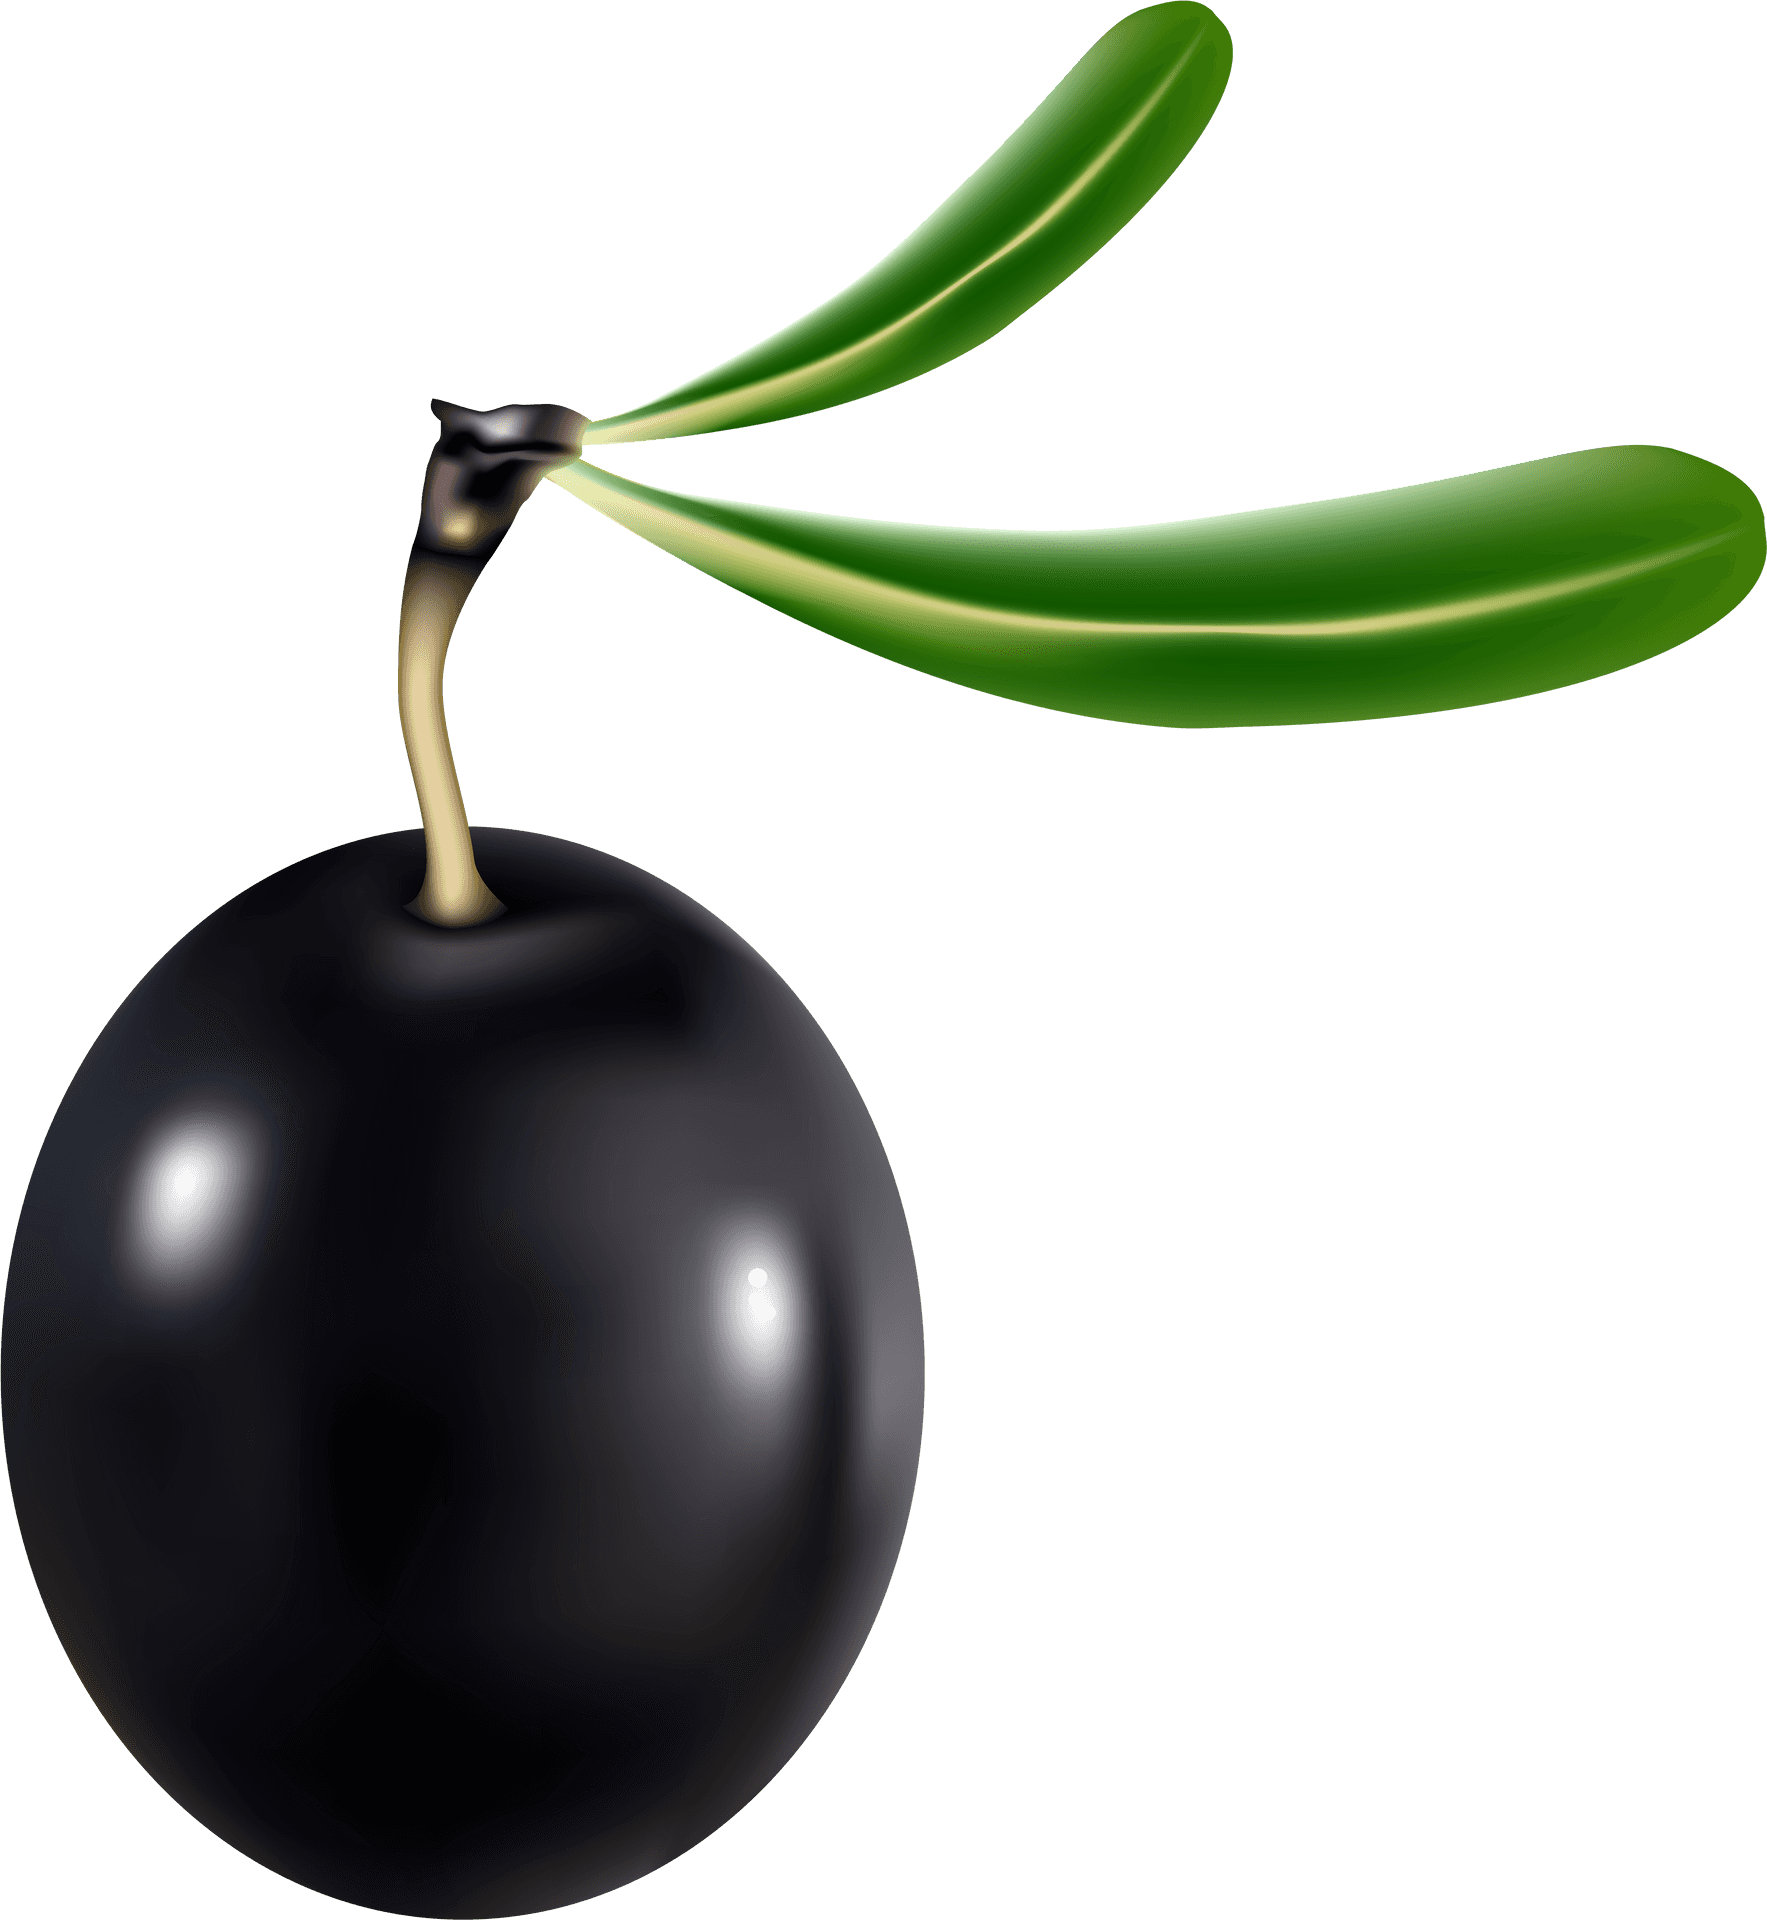 Black Olivewith Leaves Graphic PNG image